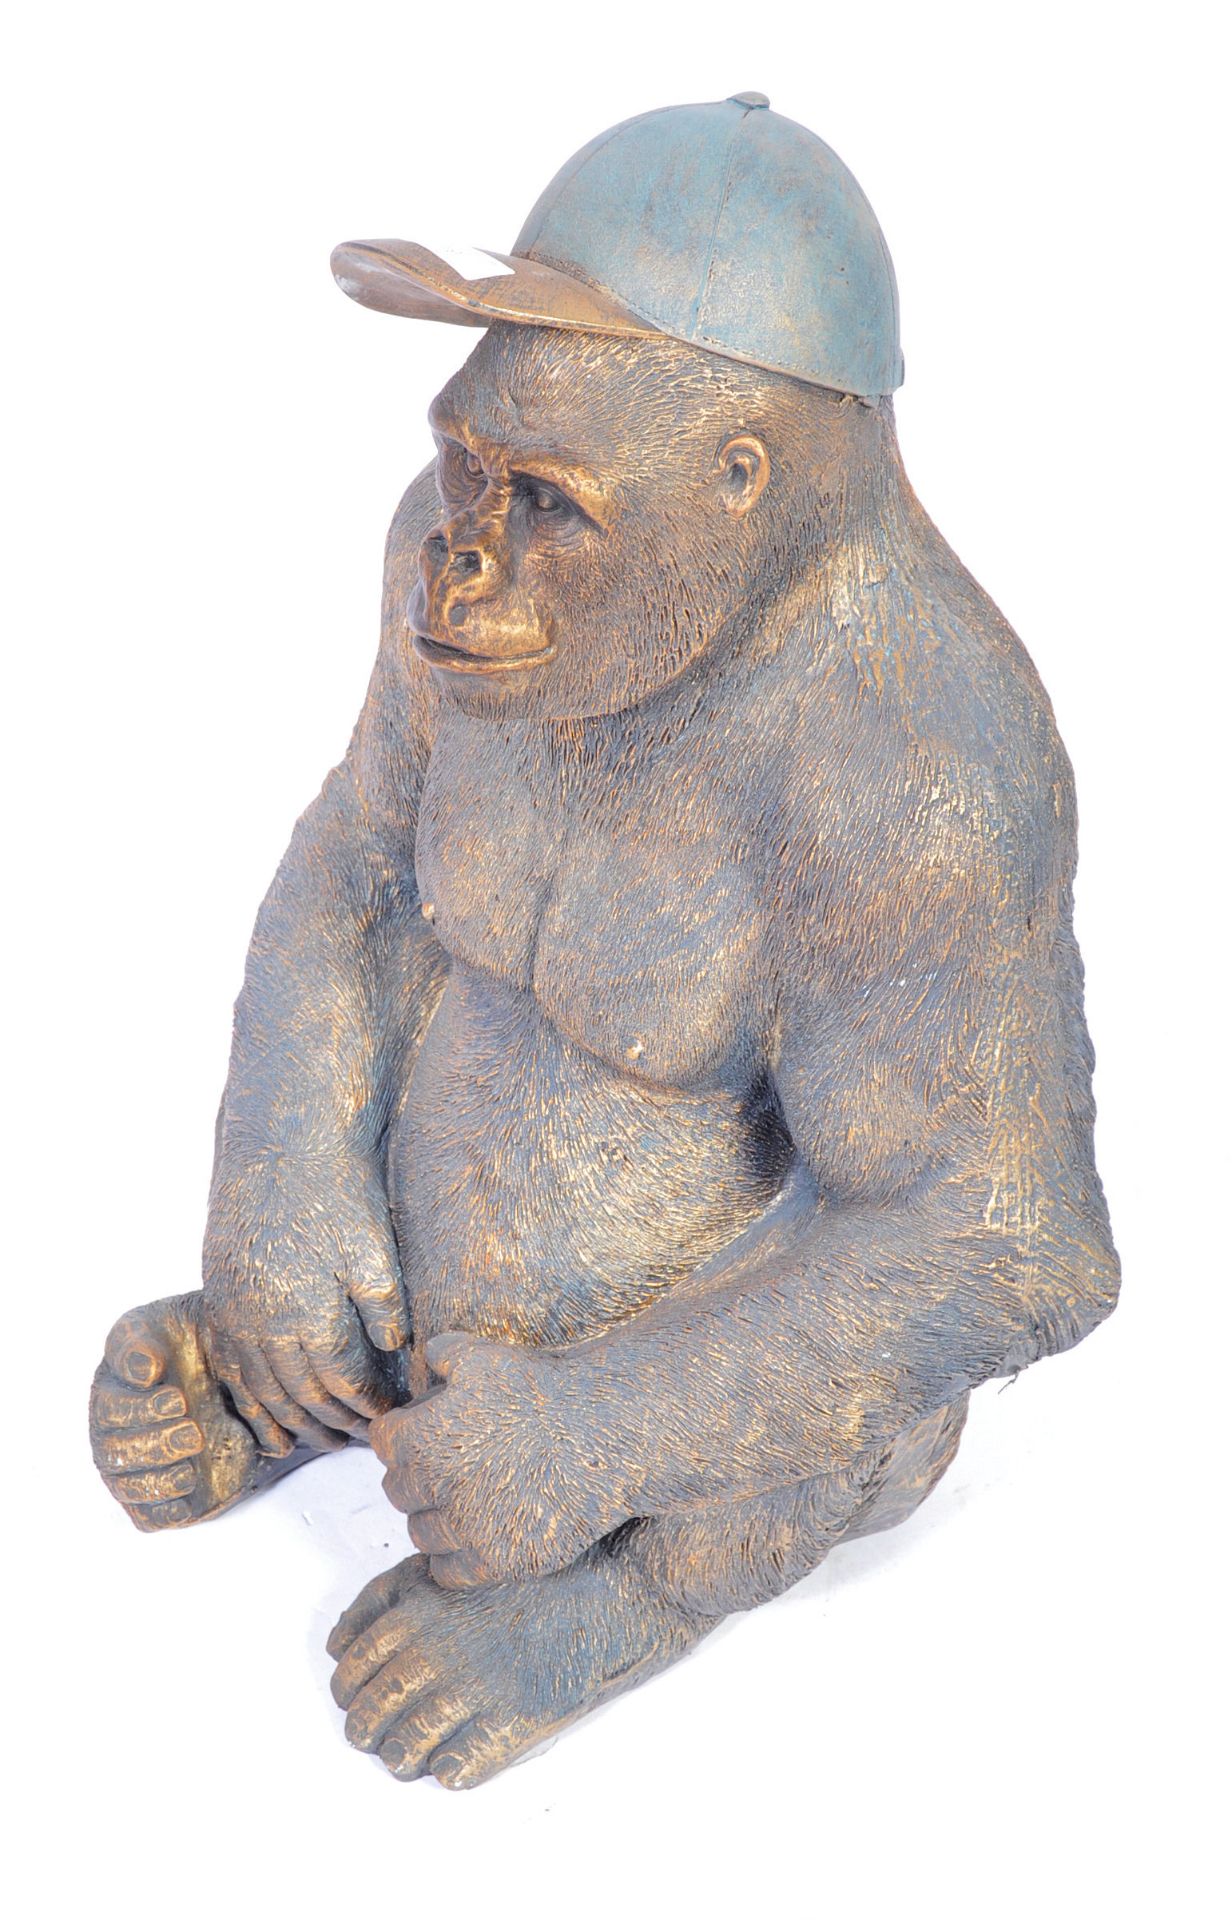 20TH CENTURY FIBREGLASS STATE OF A GORILLA WITH CAP - Image 2 of 3